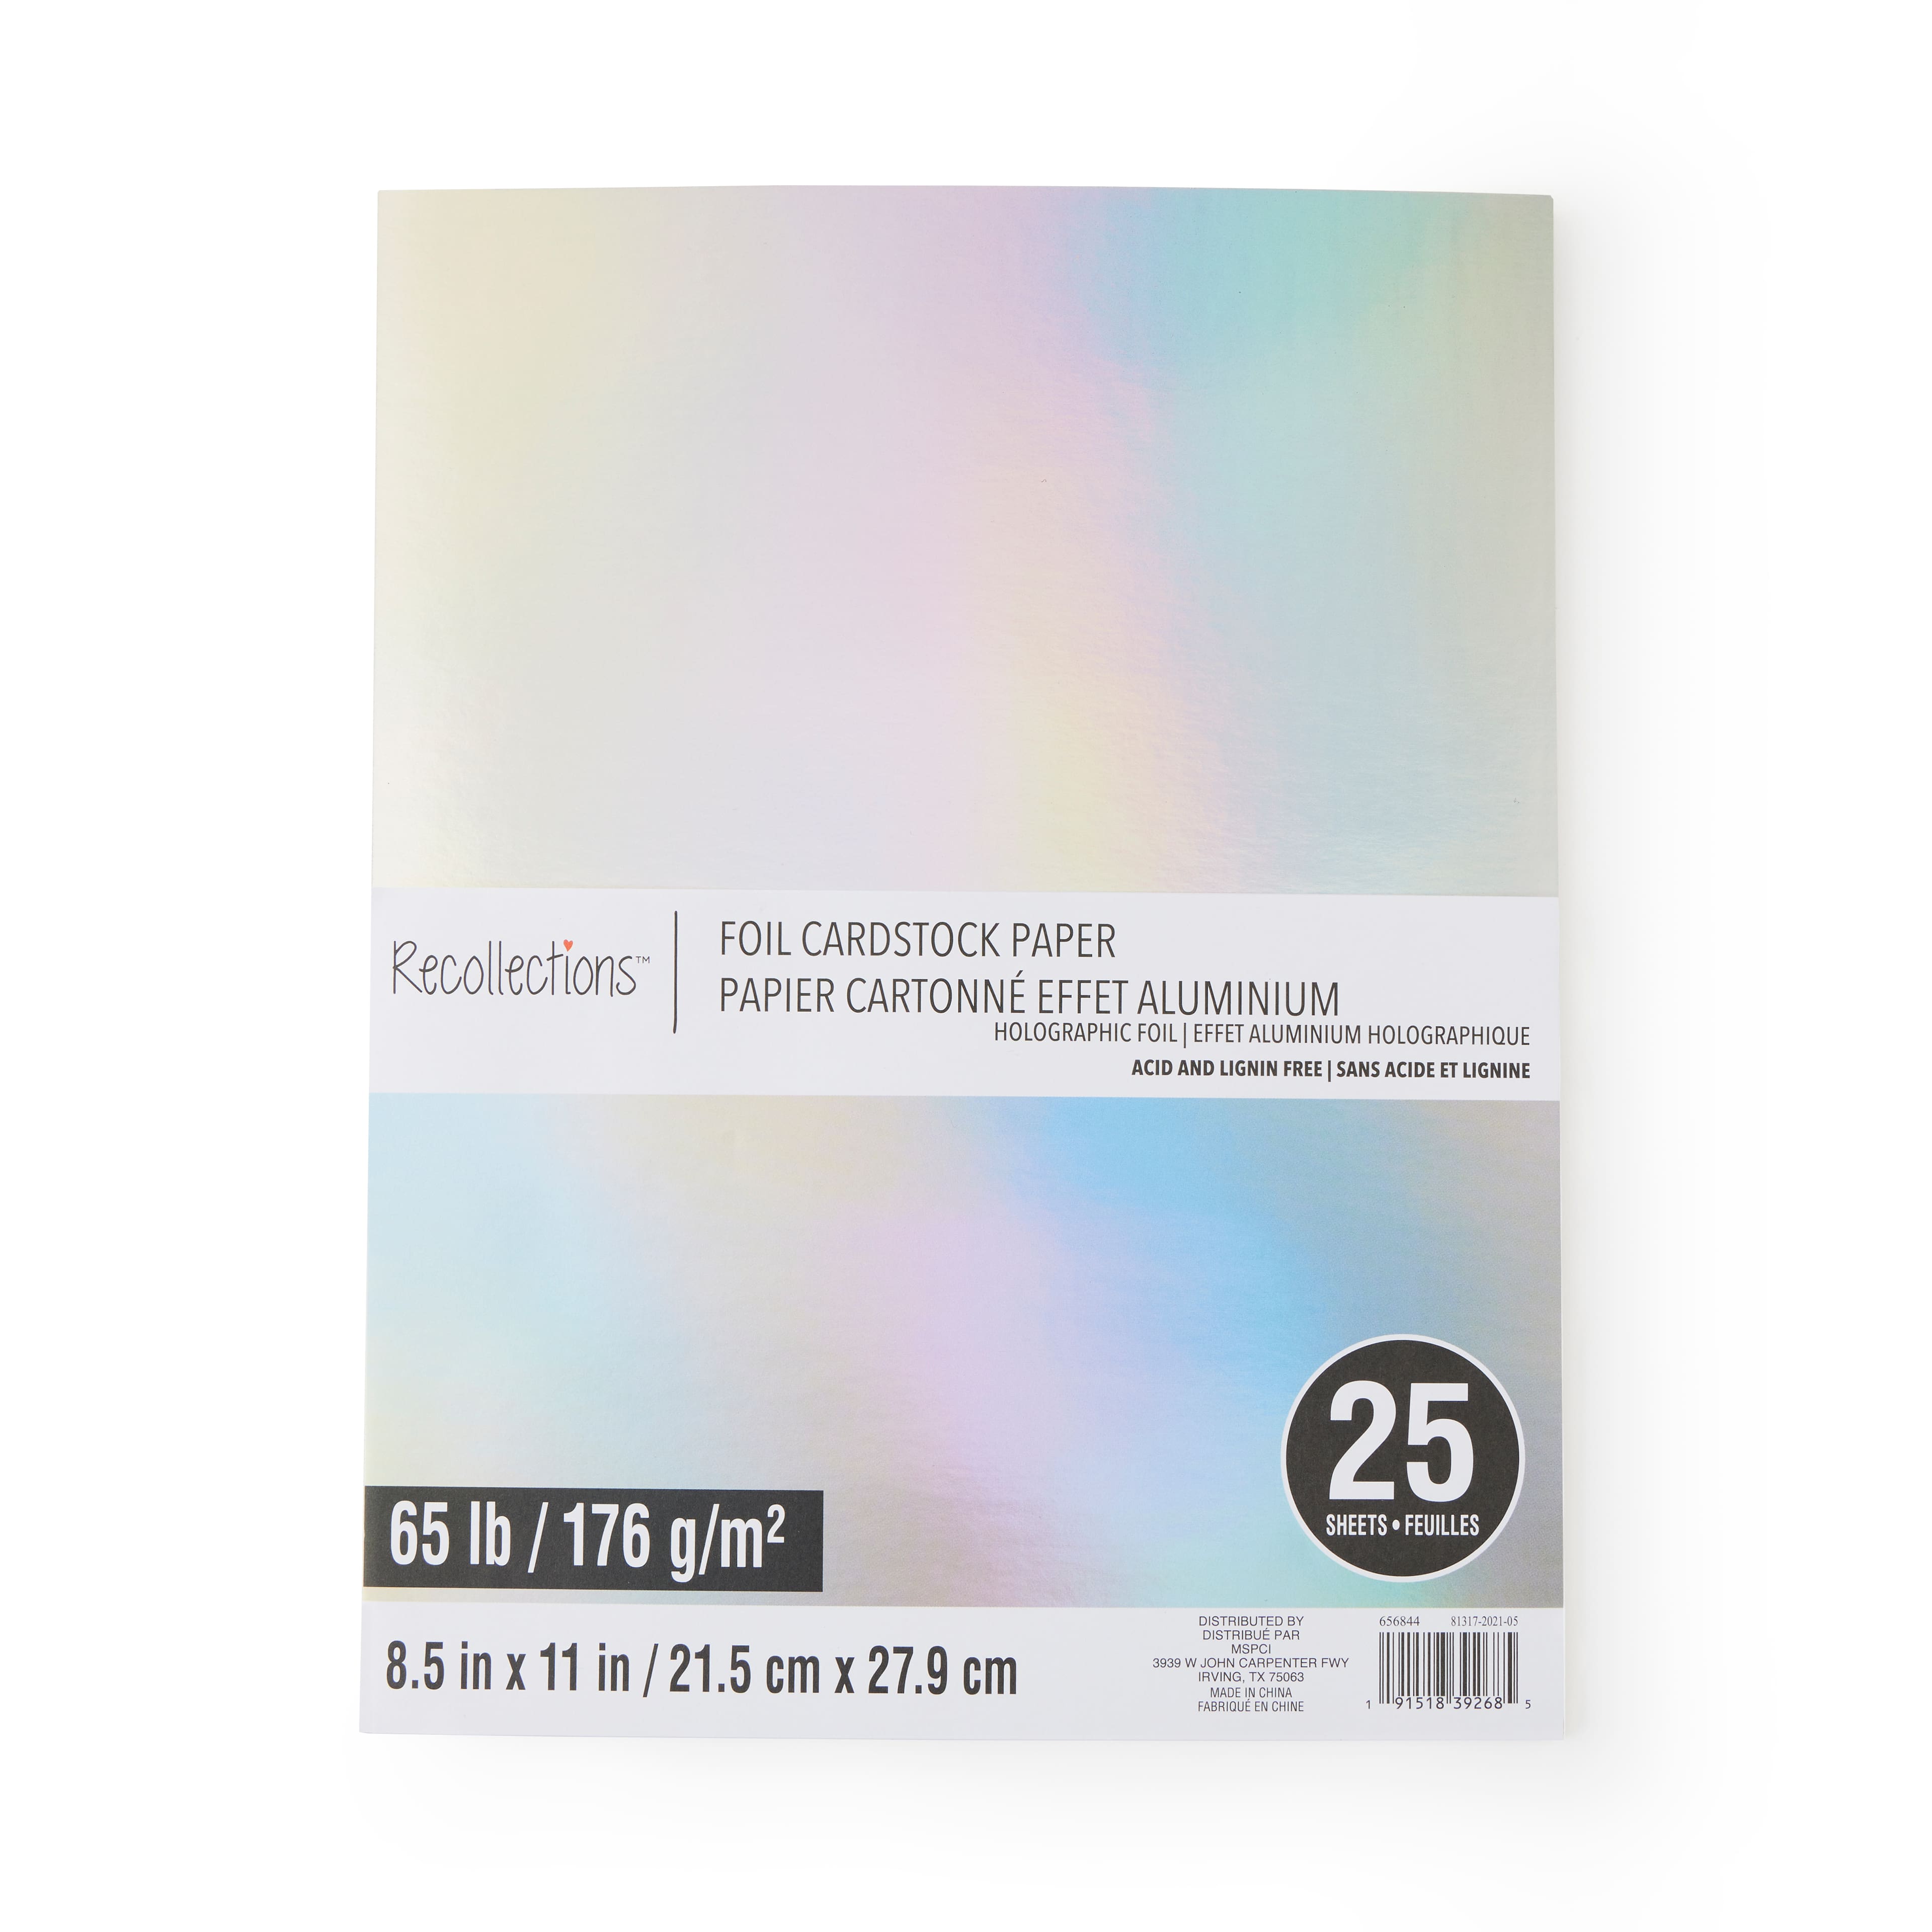 Copper Foil 8.5 x 11 Cardstock Paper by Recollections™, 25